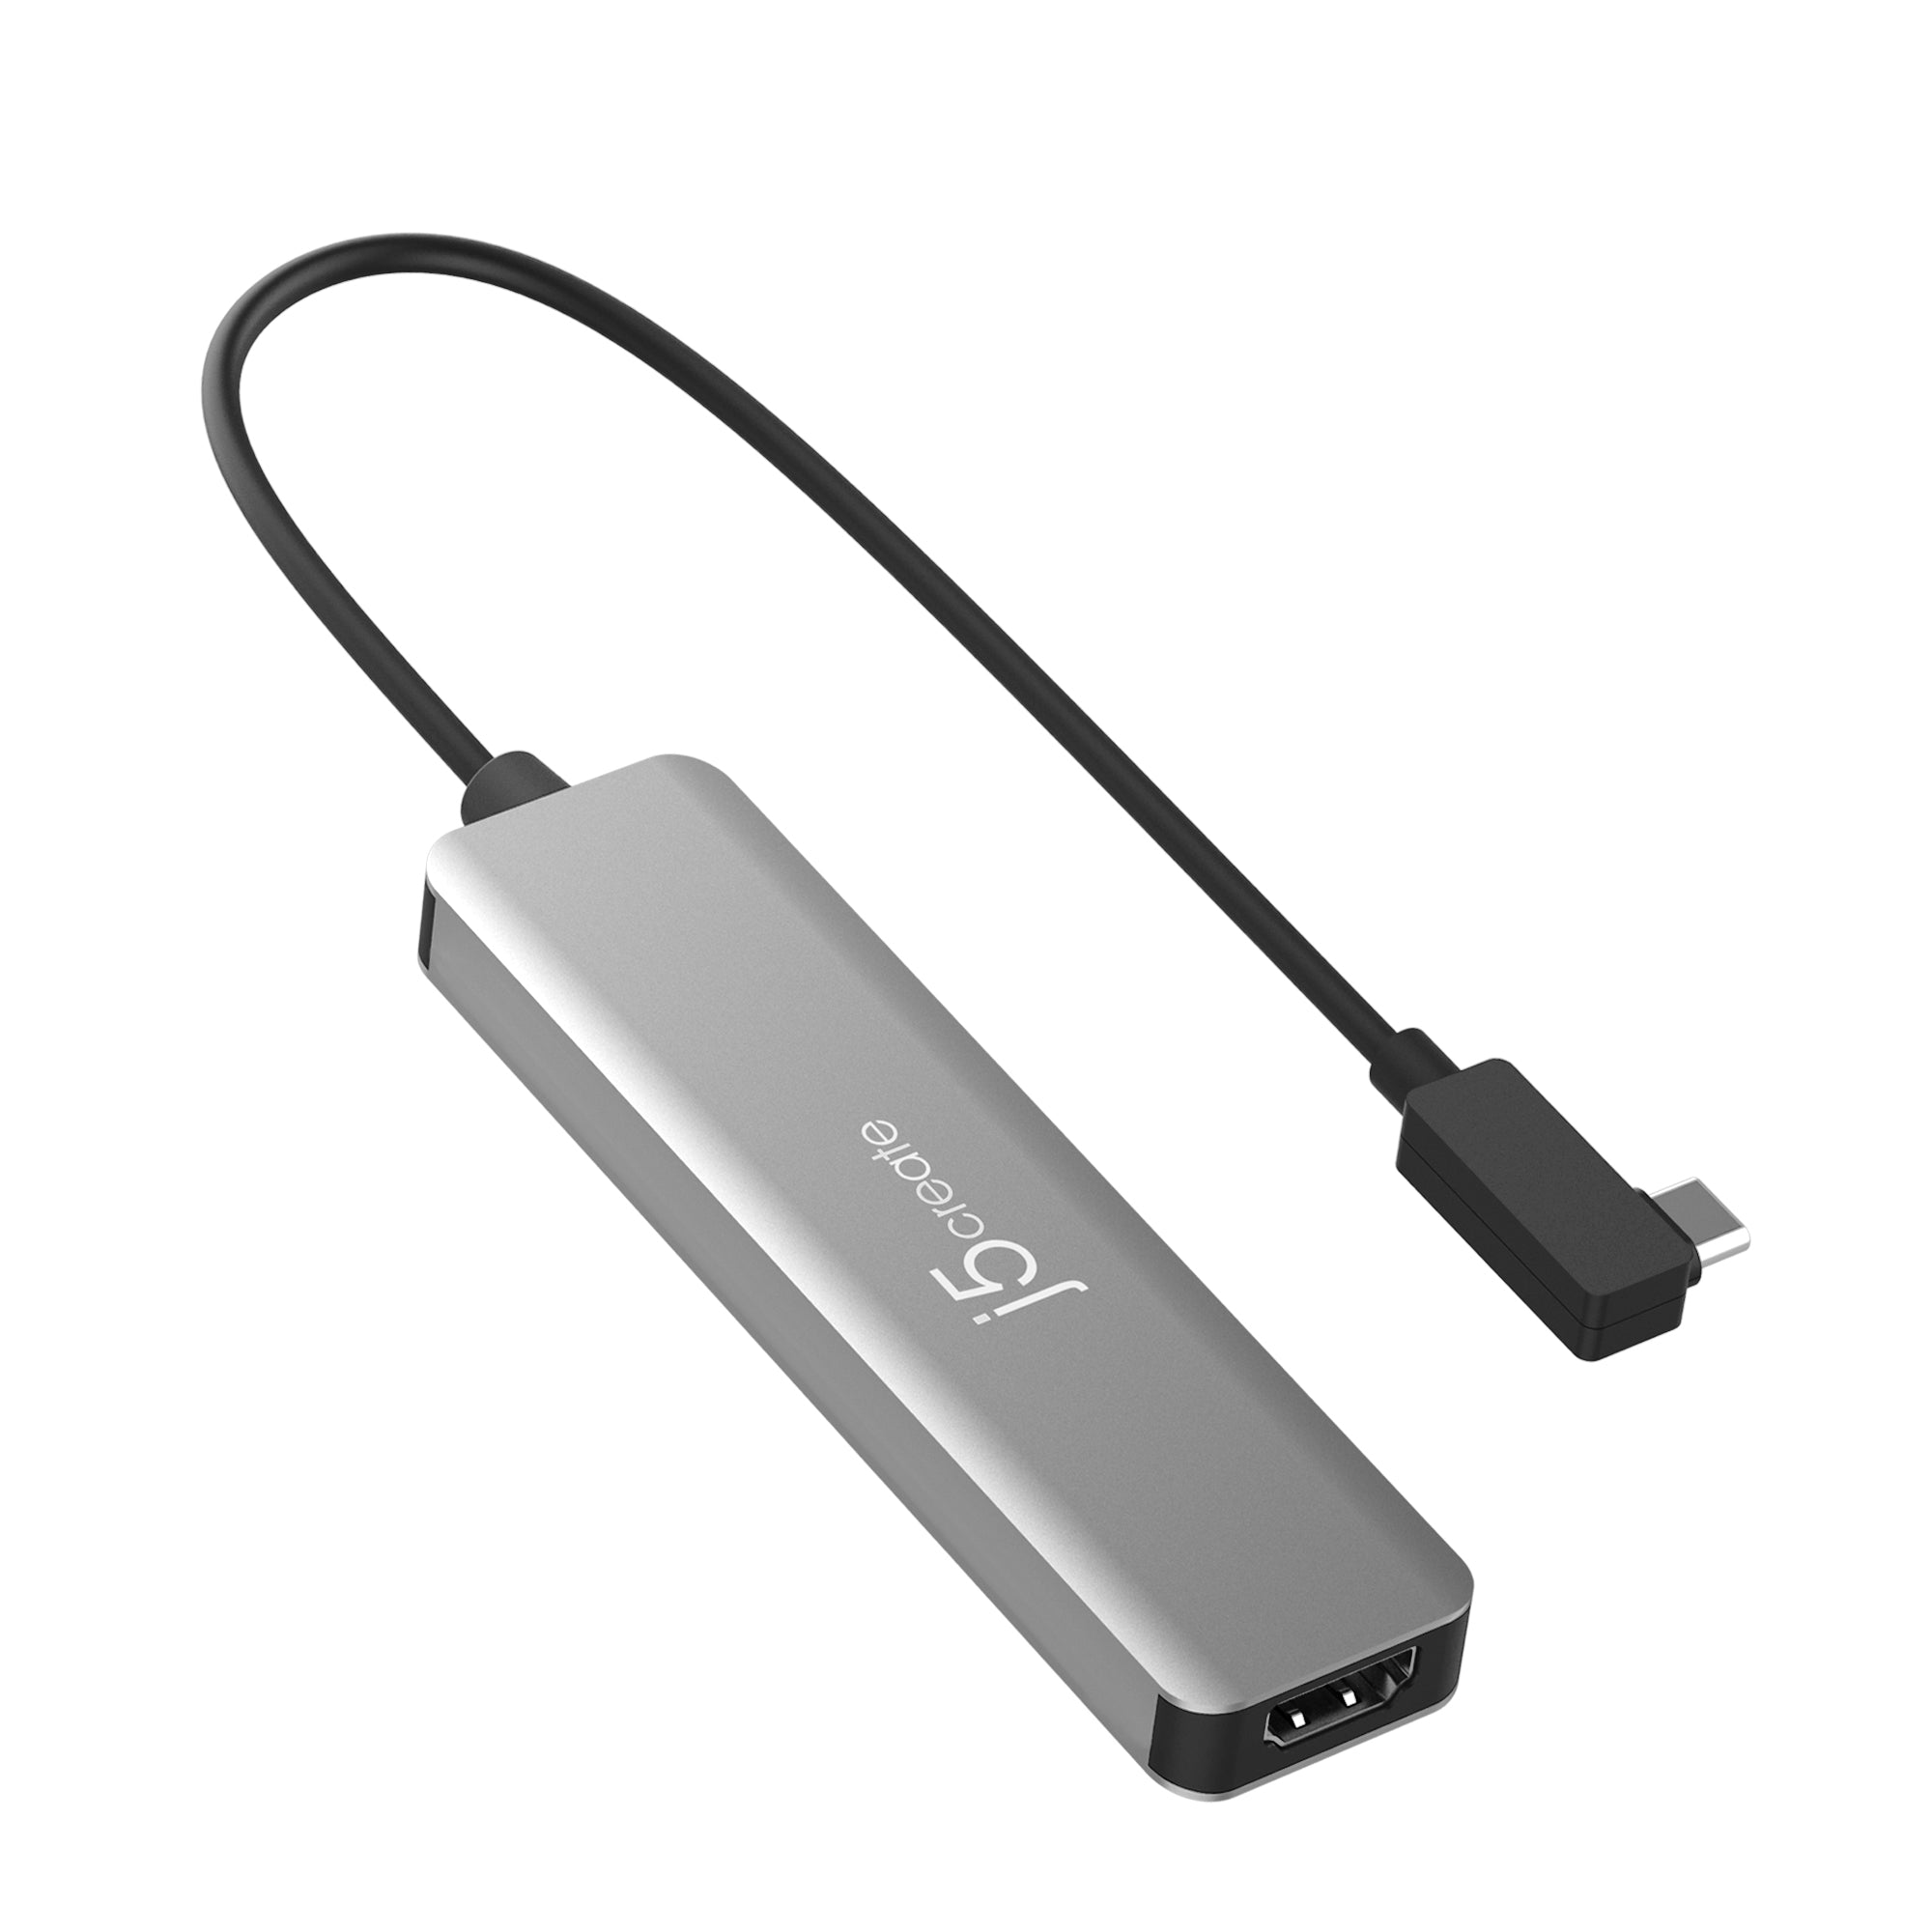 Surface USB-C to HDMI Adapter